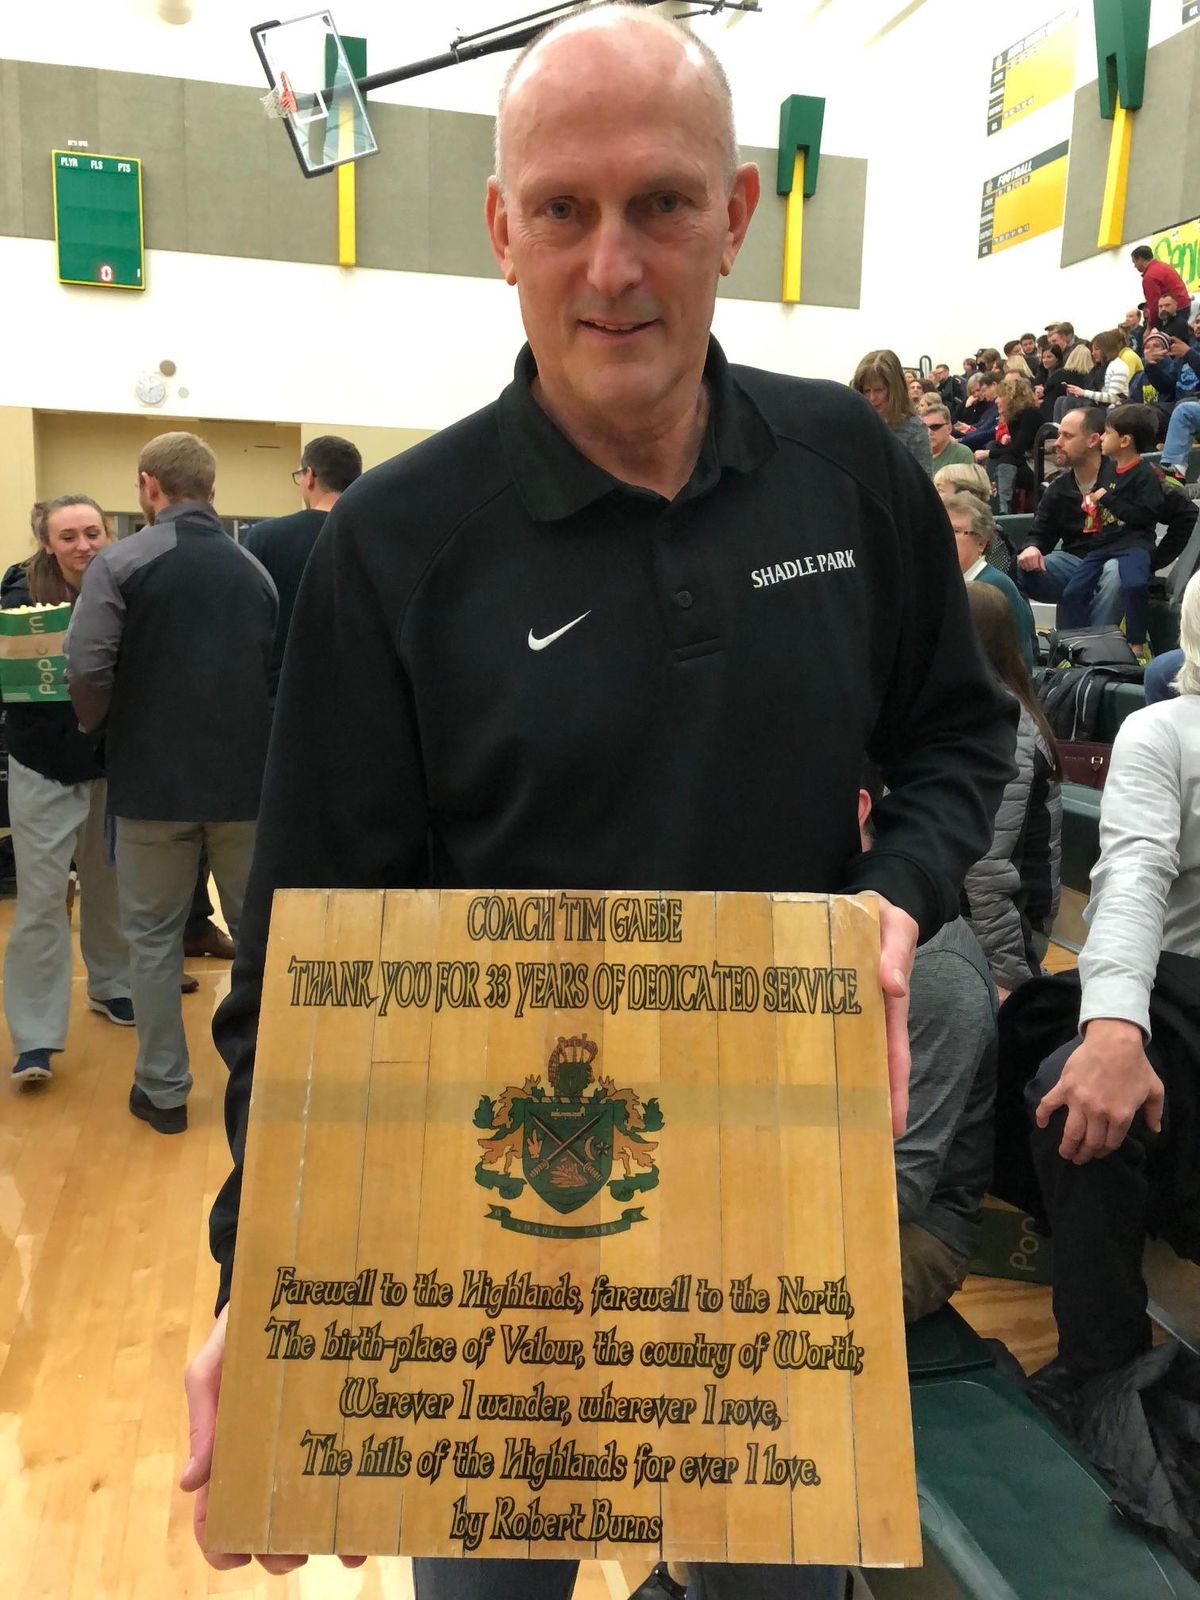 Former Shadle Park coach Tim Gaebe and the plaque presented to him by the school on Tuesday celebrating his 33 years of service. (Dave Nichols / The Spokesman-Review)